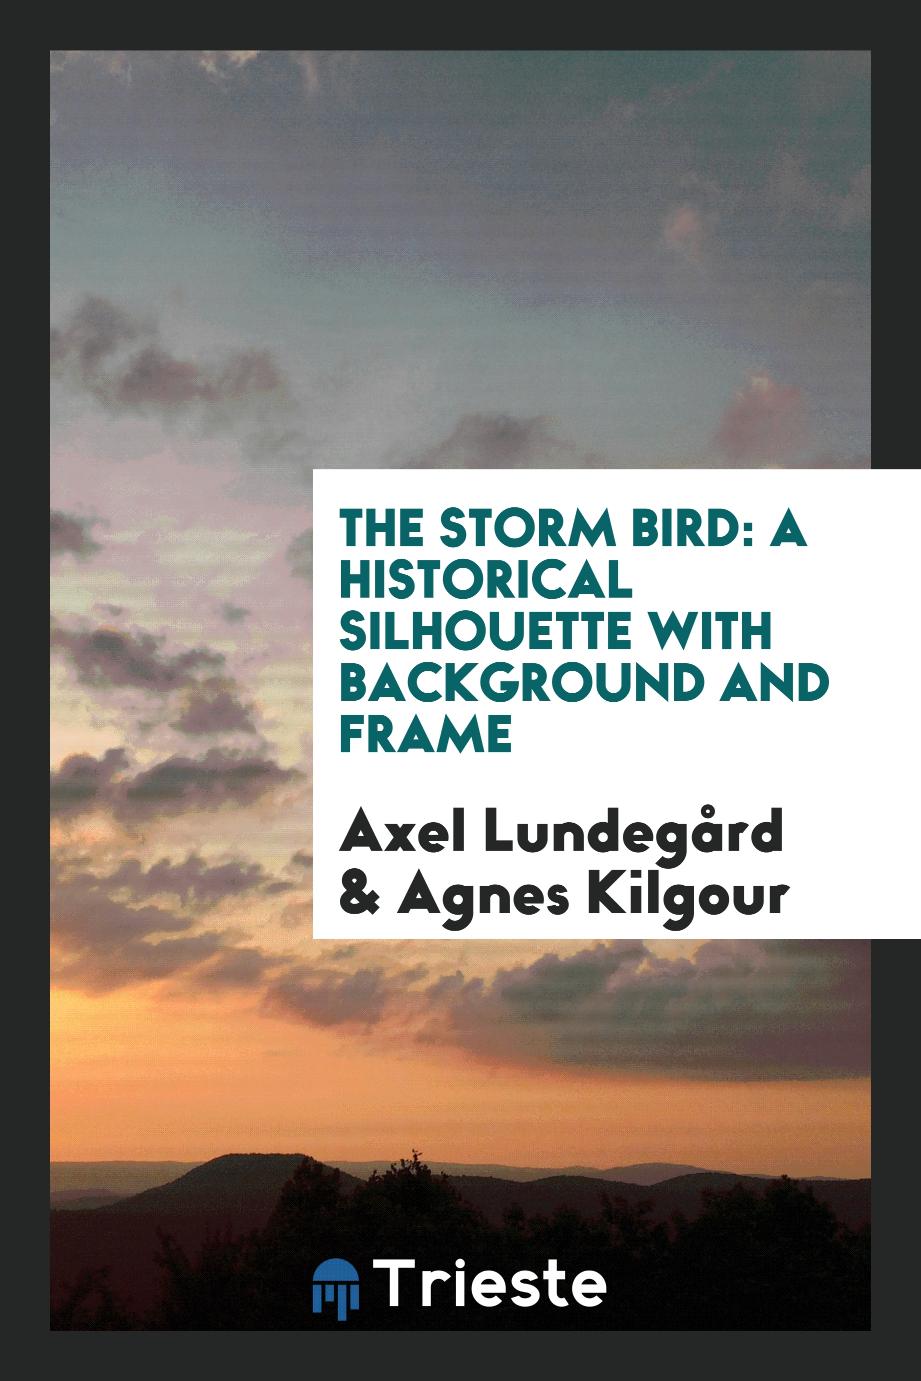 The Storm Bird: A Historical Silhouette with Background and Frame